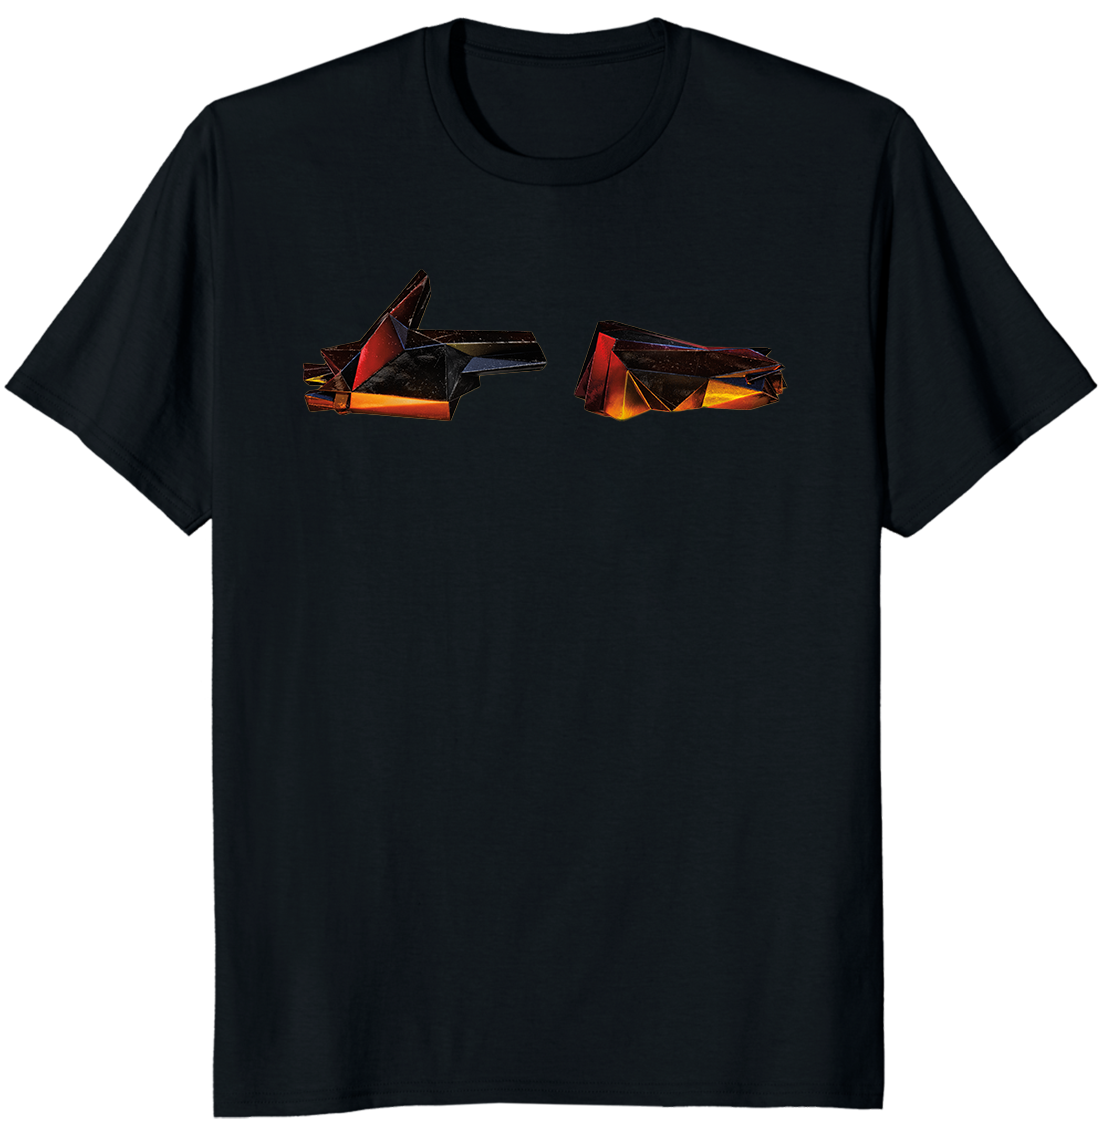 Run The Jewels - RTJ4 T-shirt (Black) - Official Store